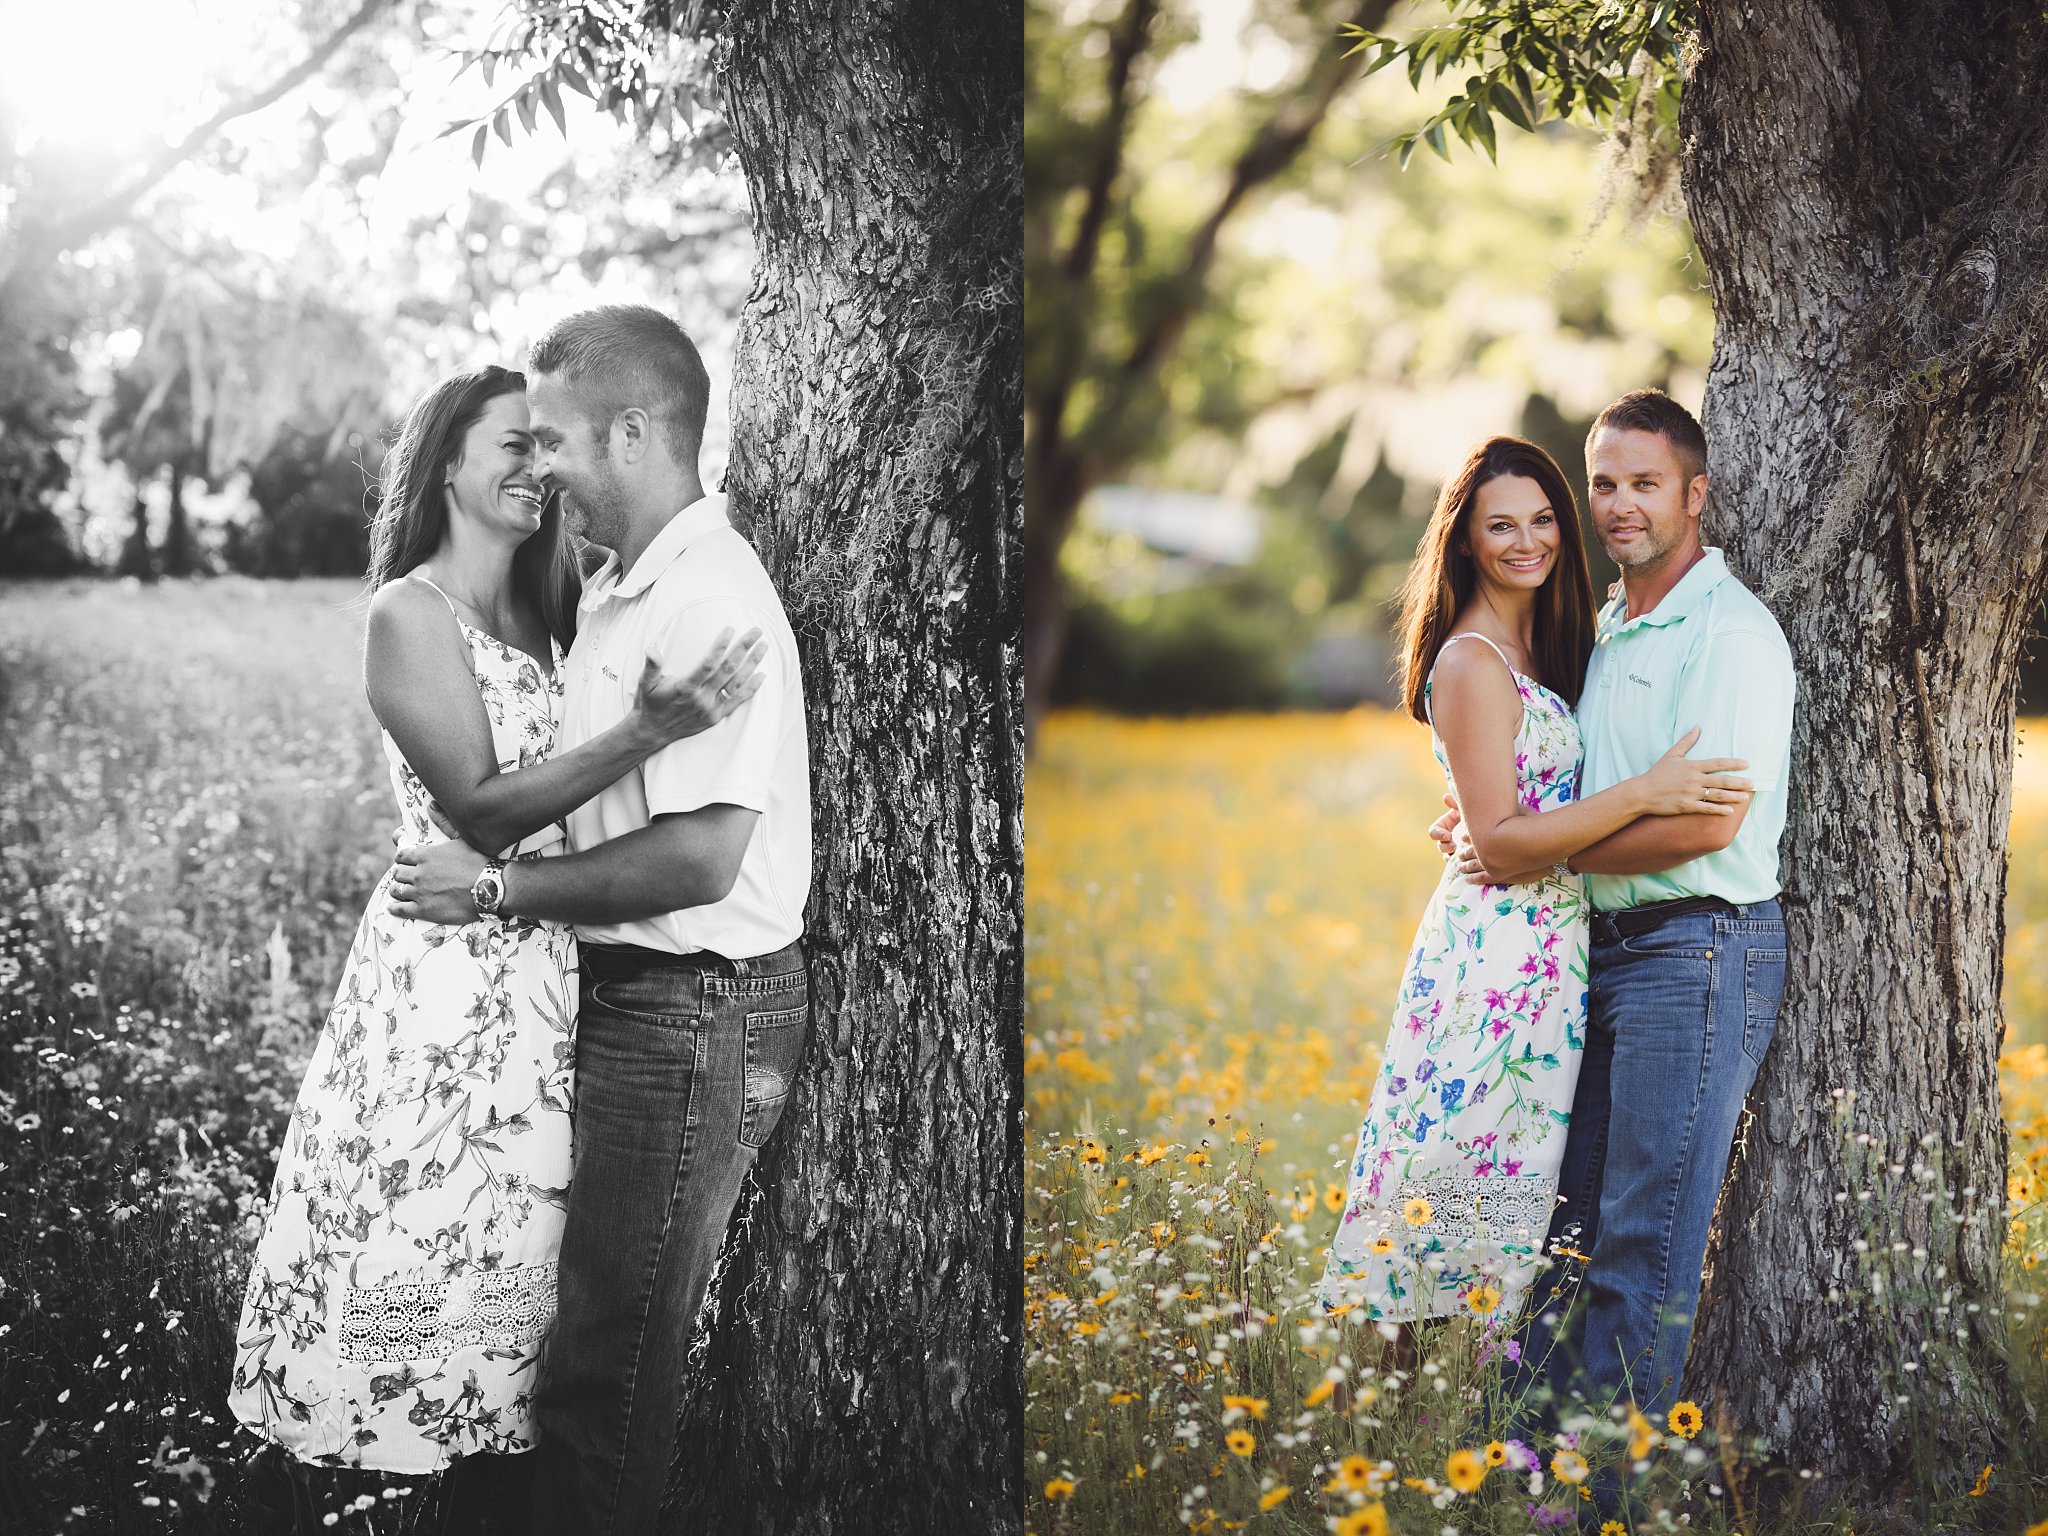 NE FL Family Photography beautiful black and white backlit image of couple by tree in flower field